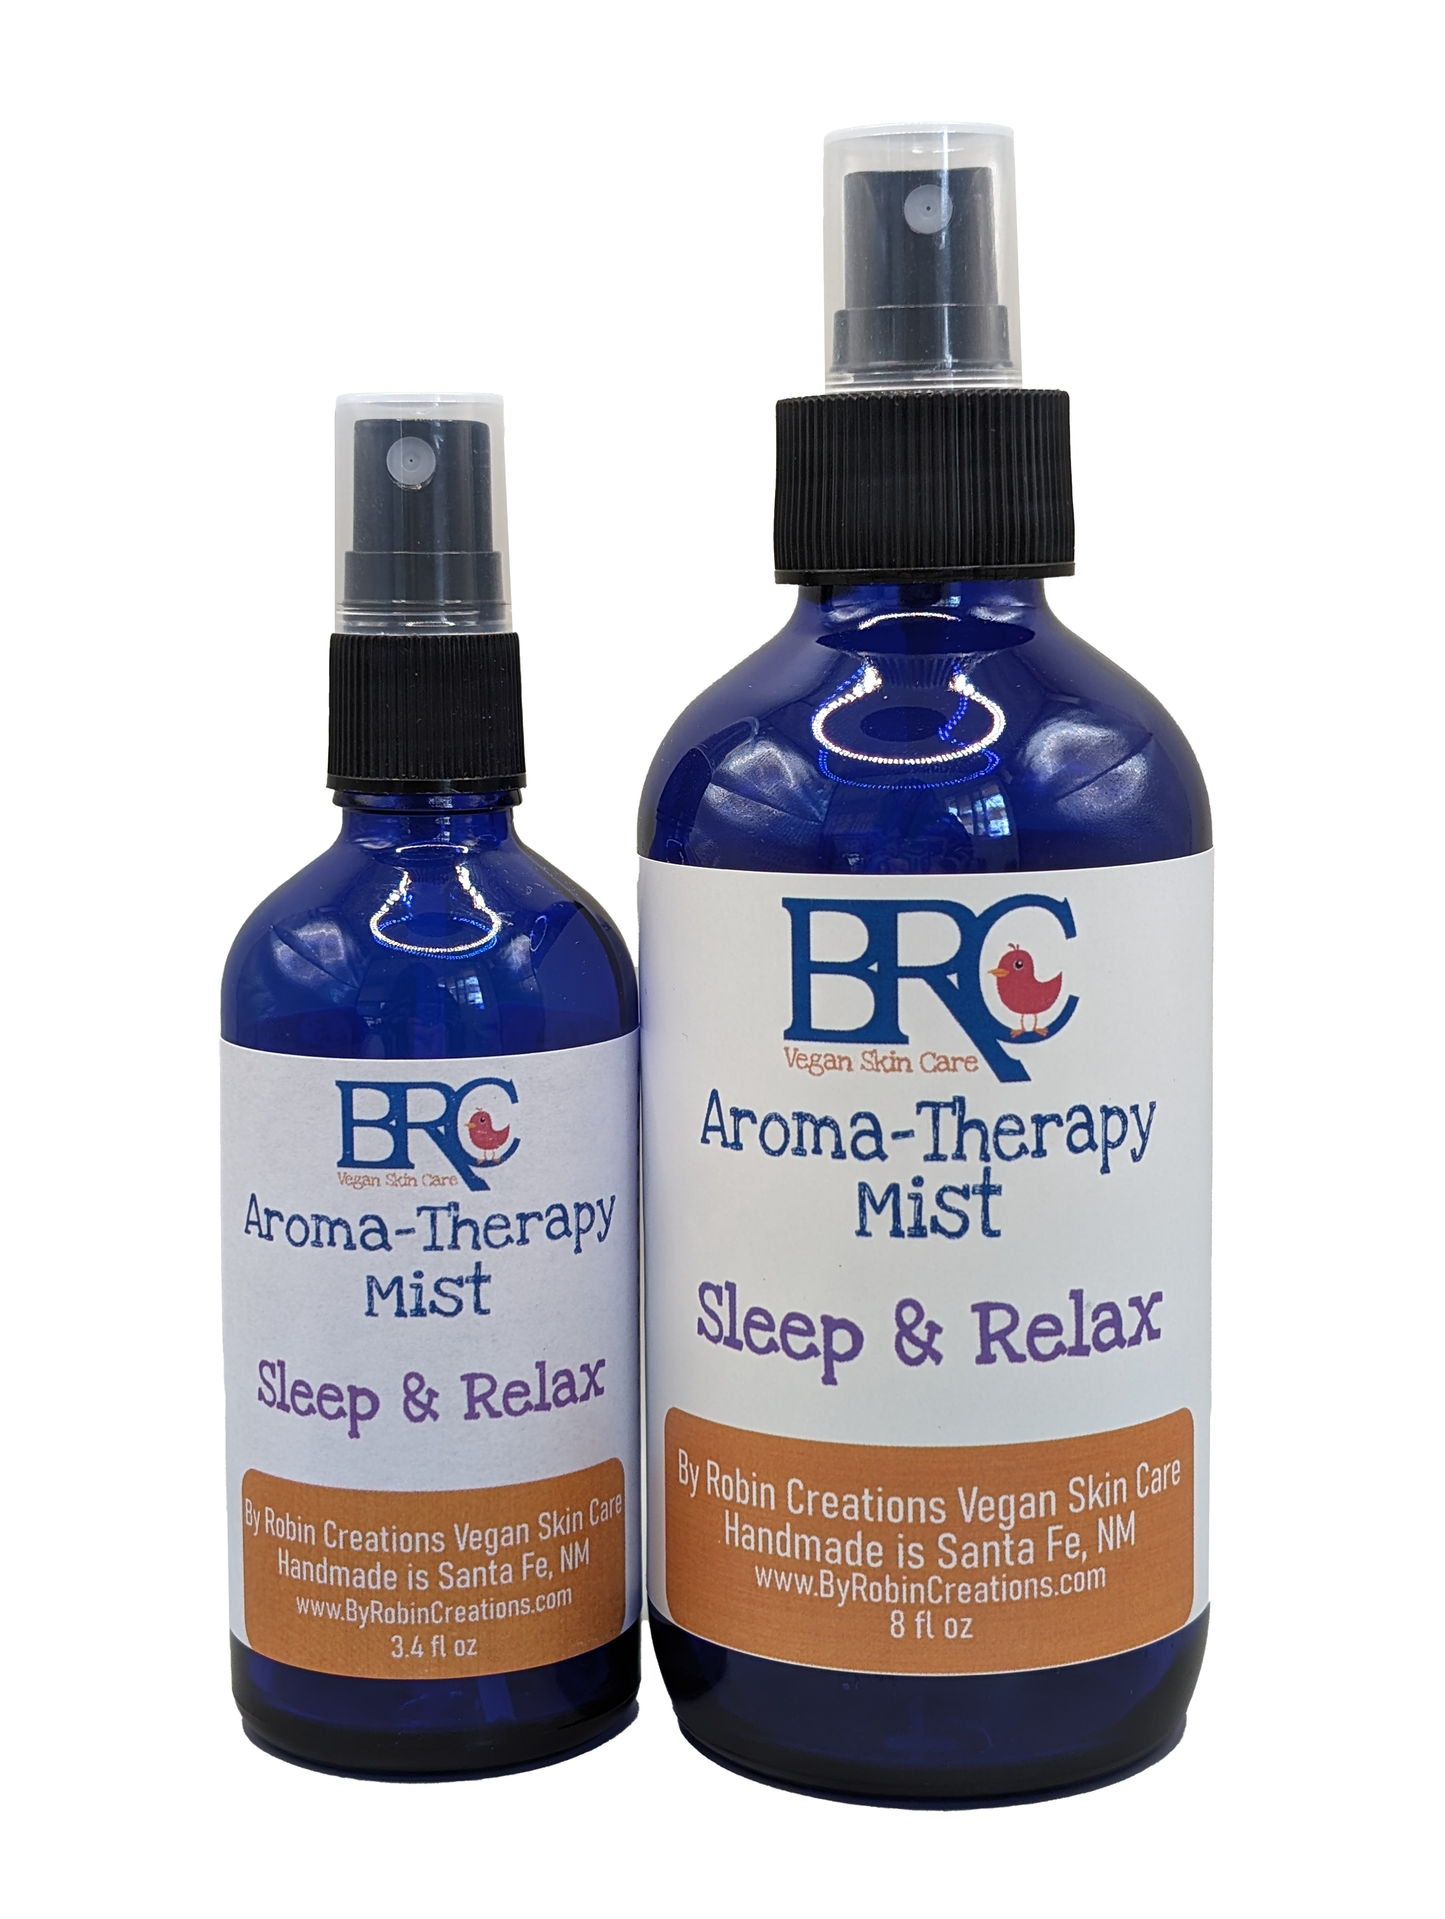 Herbal Aroma-Therapy Mist